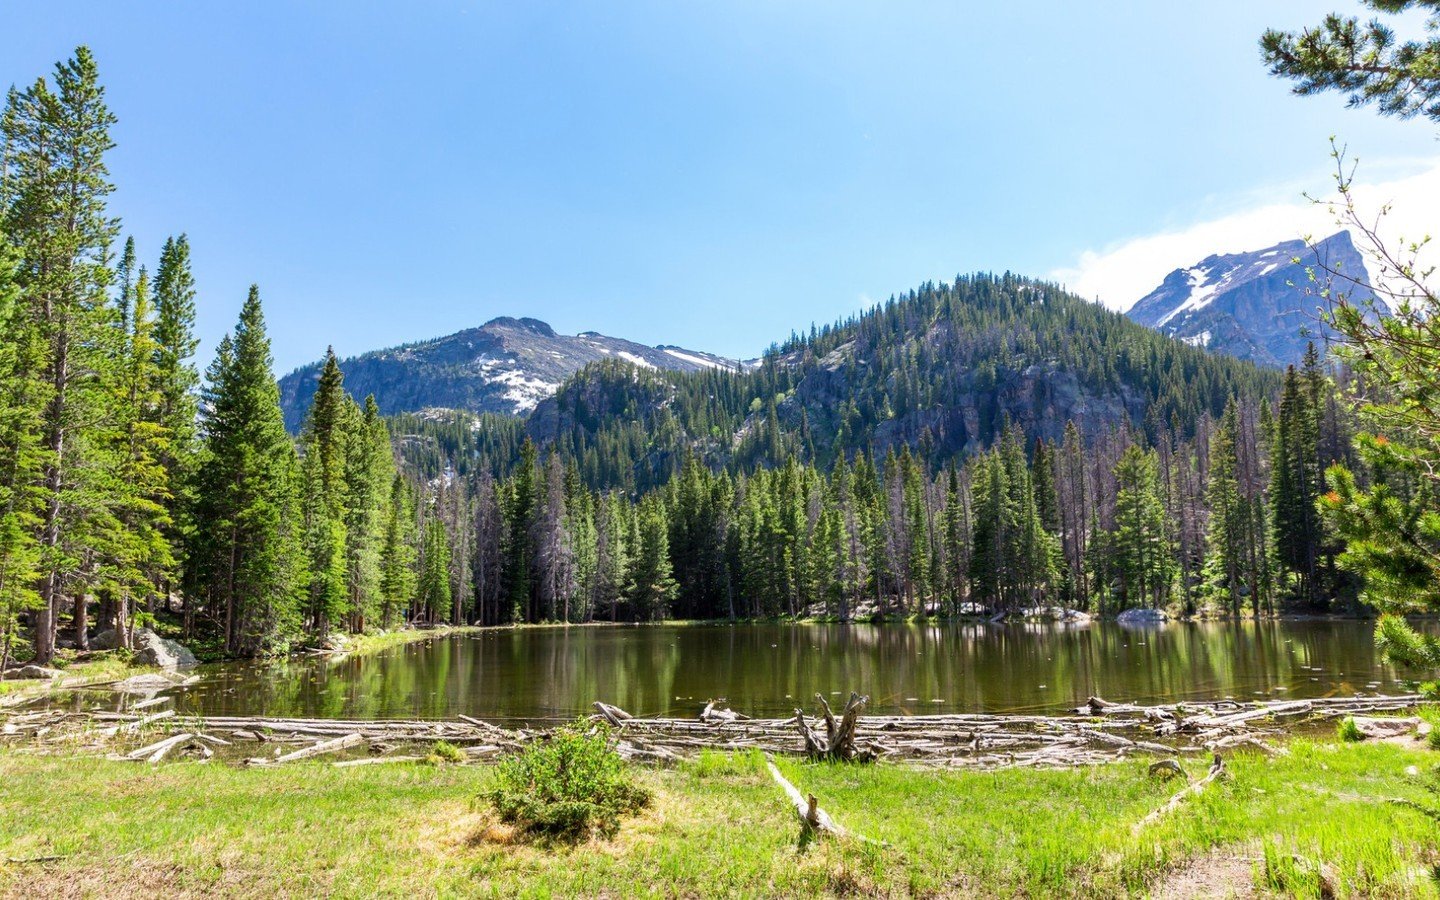 It's time to plan and book your Memorial Day Weekend getaway to Estes Park. 

Plus, Estes Park is holding our Art Market Memorial Day Weekend Event. Visit our Discovery Lodge page and take advantage of several promotions. 

https://1l.ink/JKJG2KW - E